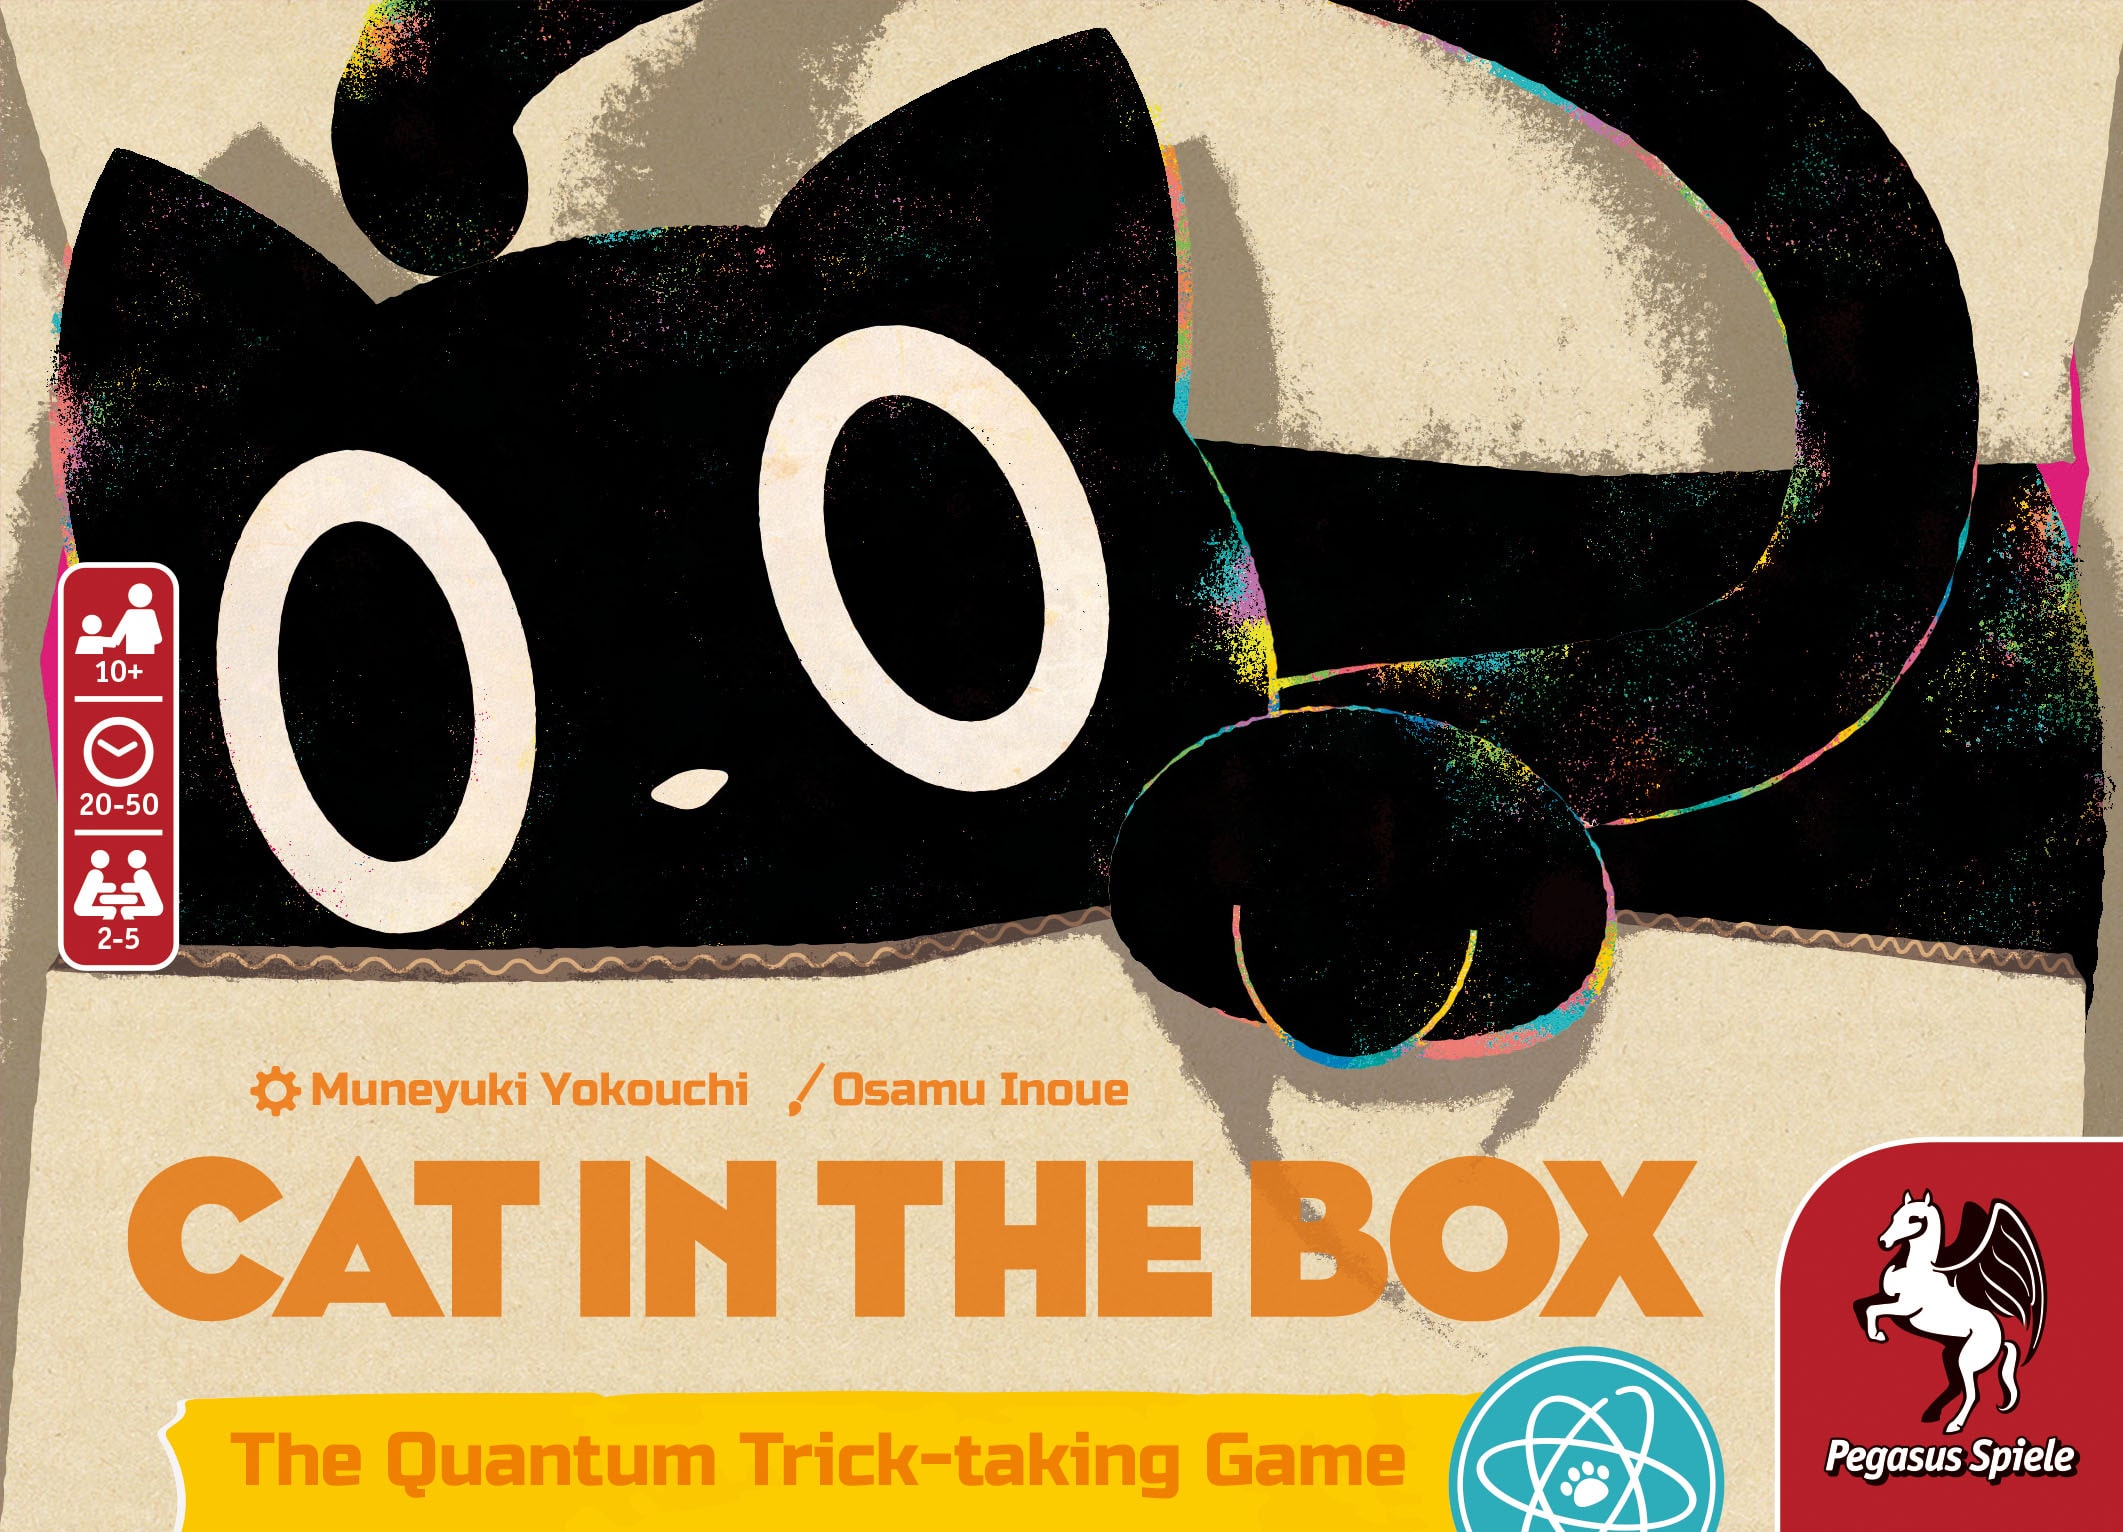 Bézier Games Cat in the Box